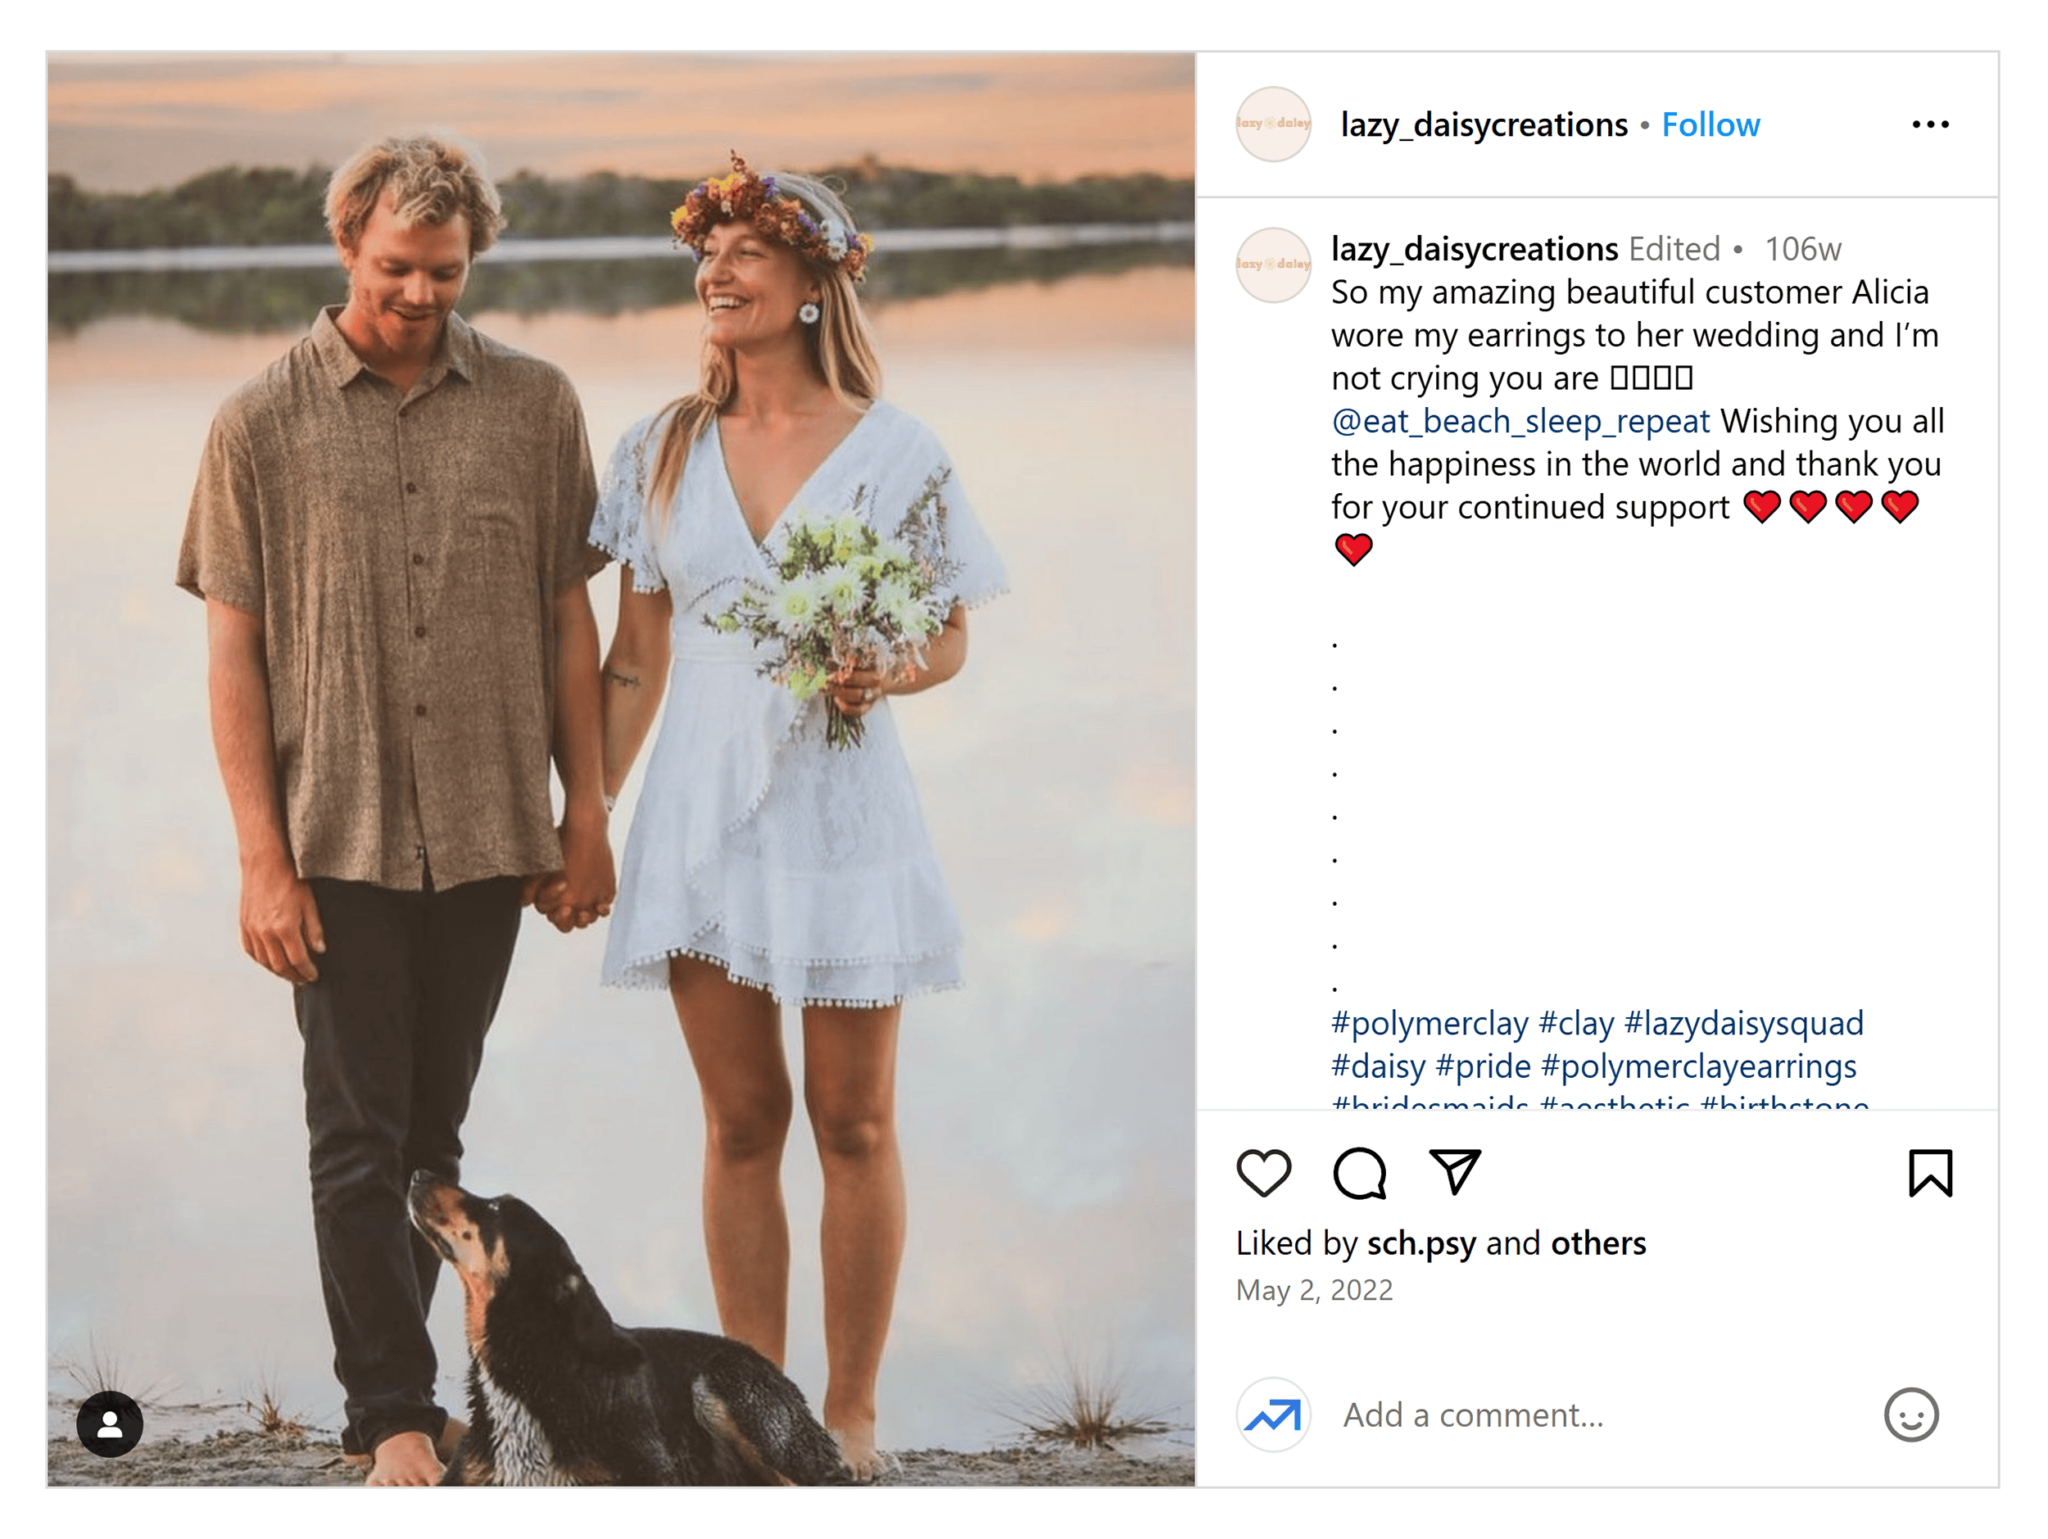 instagram-lazy-daisy-creations Small Business Marketing: 6 Proven Strategies for More Reach